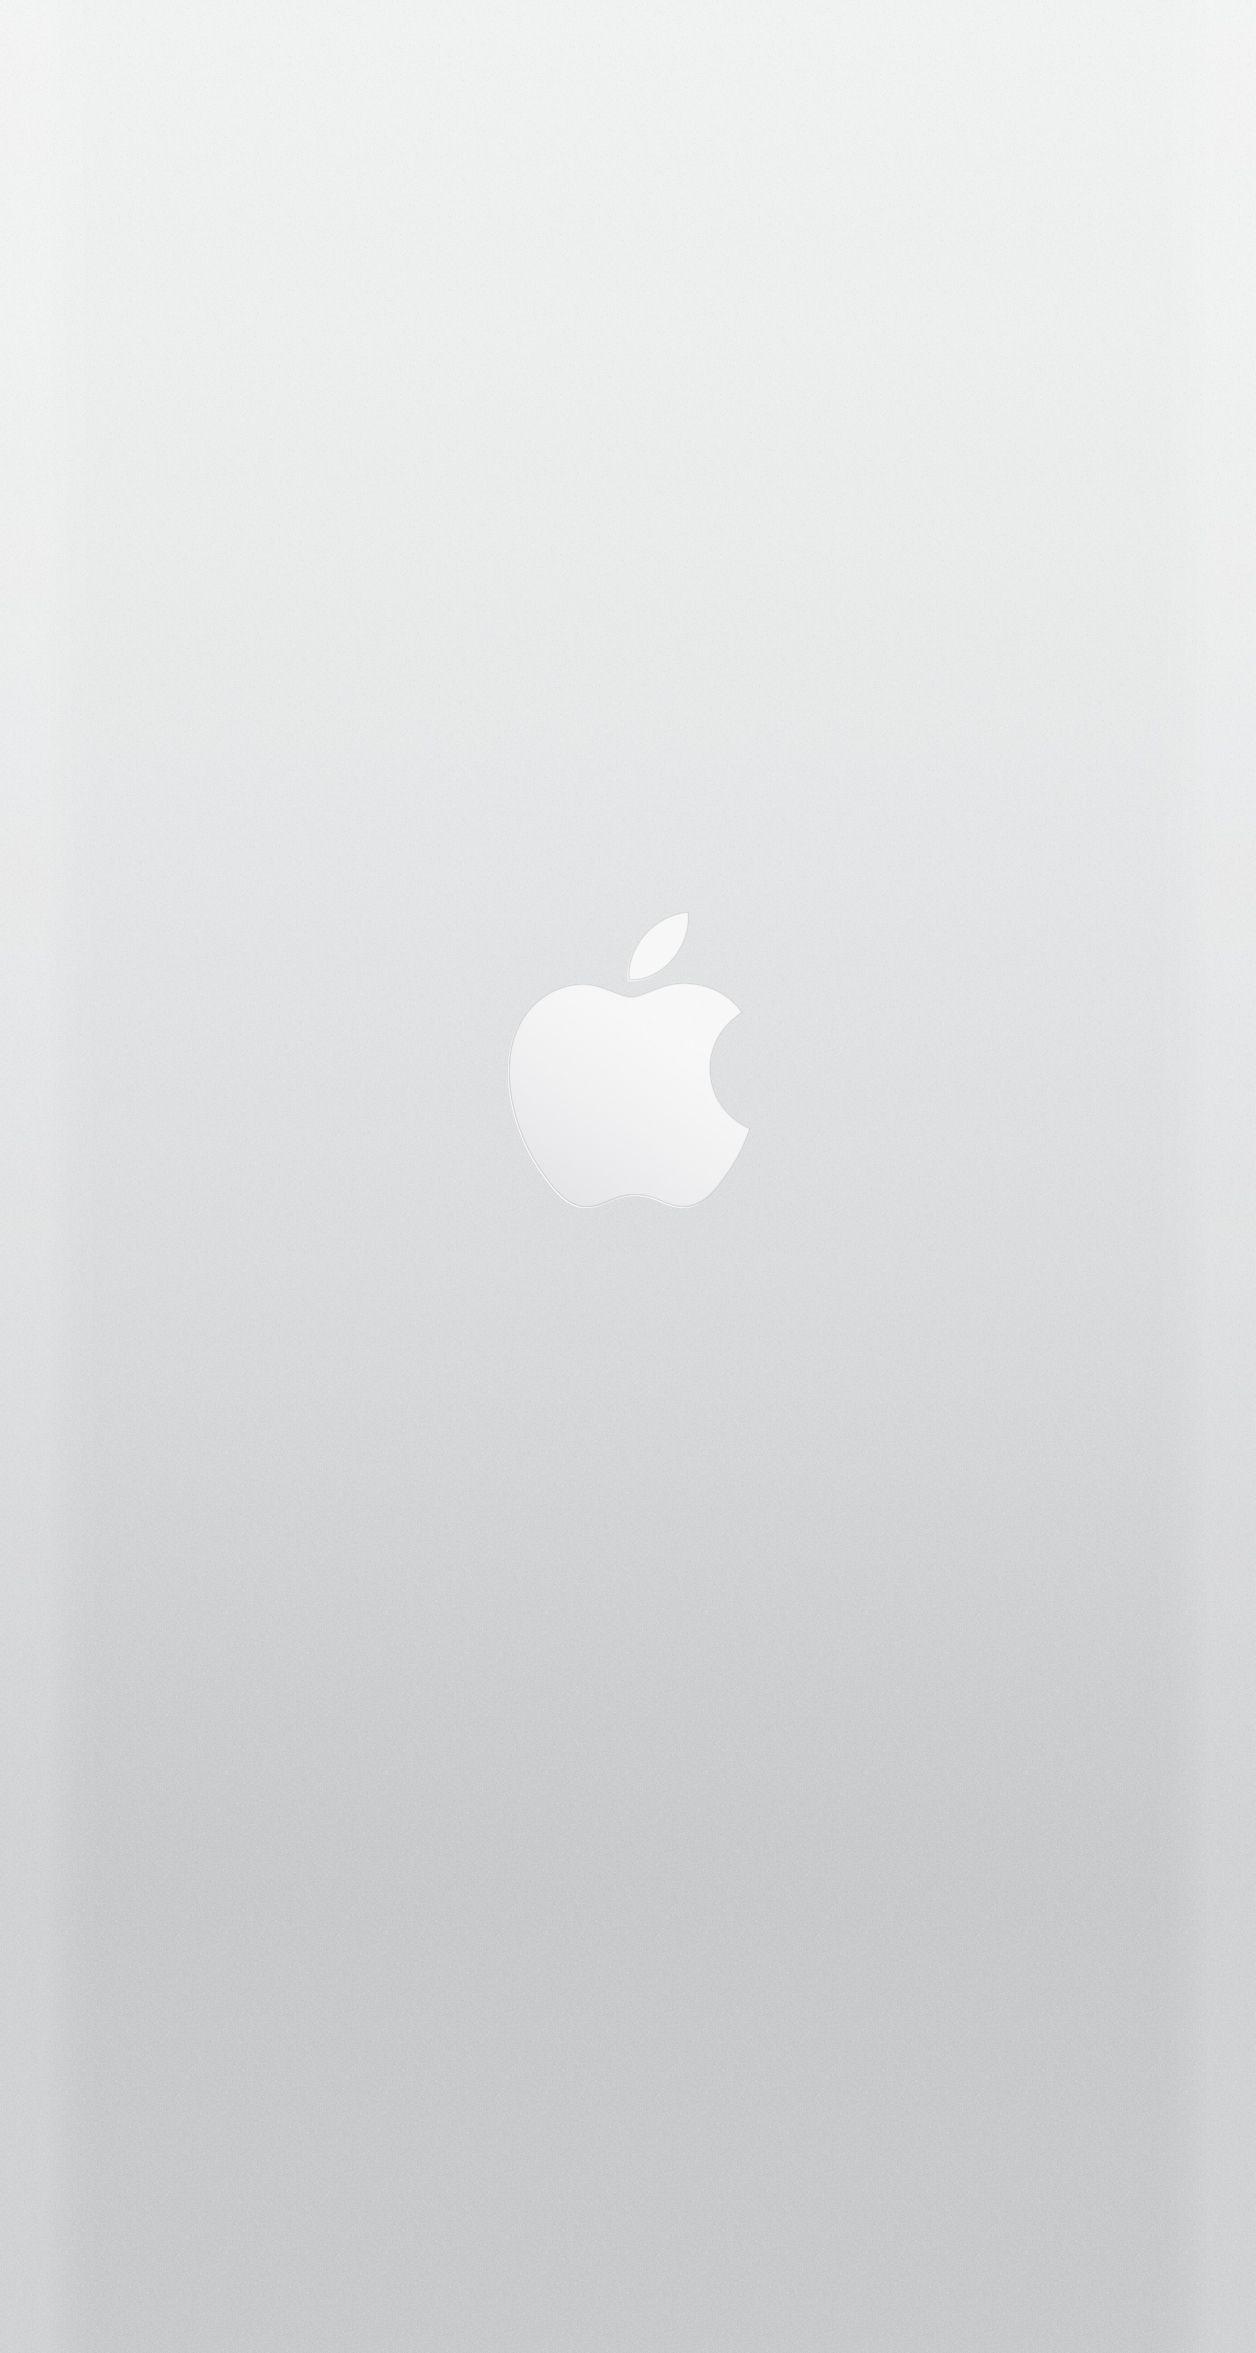 White Apple iPhone Logo - Apple logo wallpapers for iPhone 6